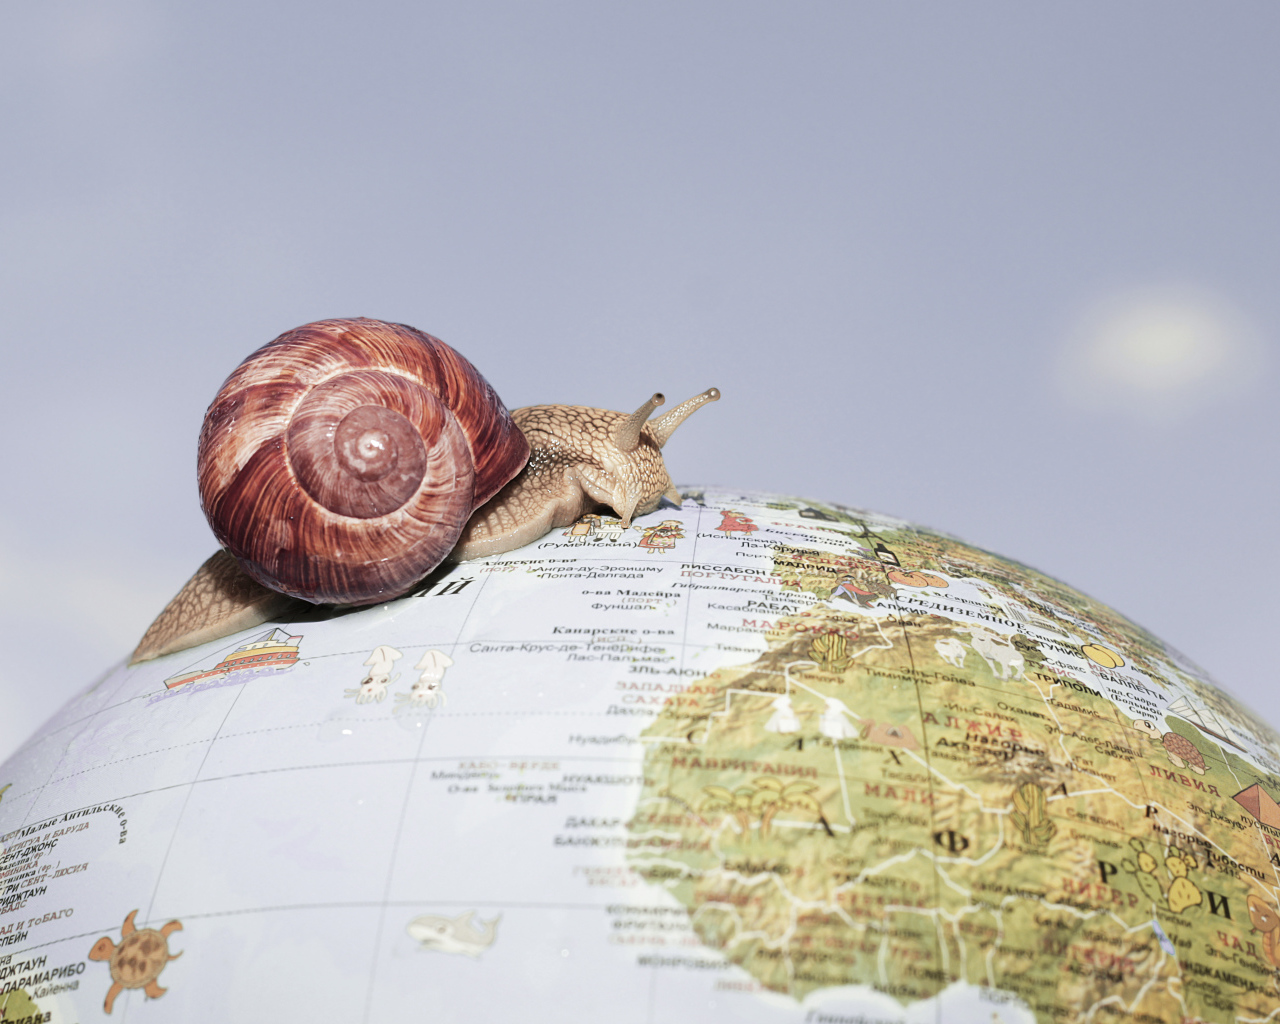 The snail crawls along the globe on a gray background